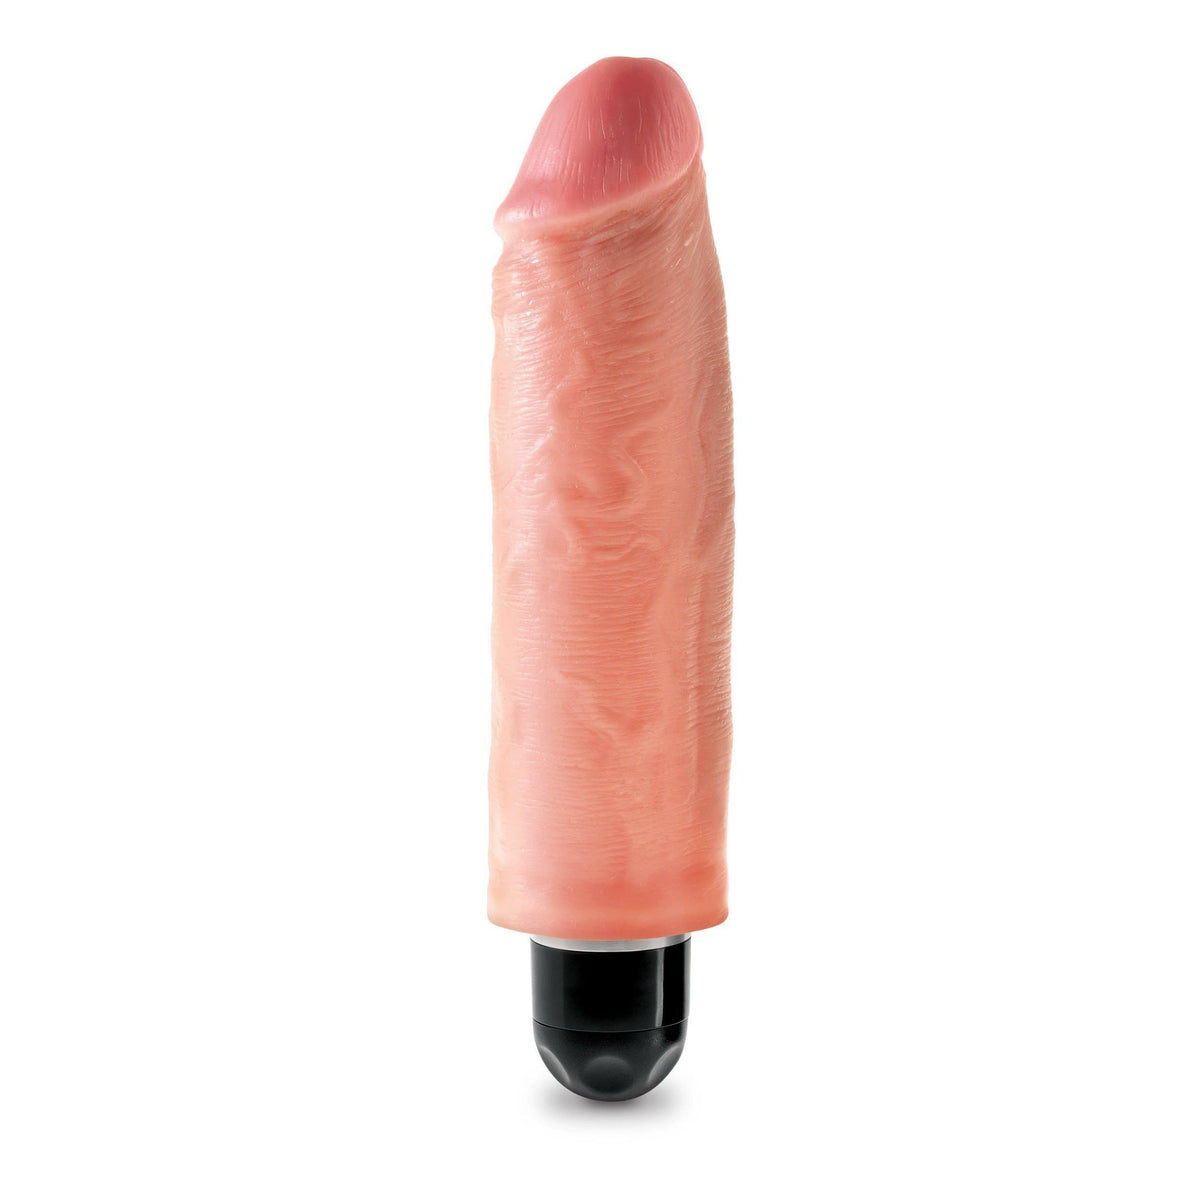 Pipedream - King Cock 6&quot; Vibrating Stiffy Cock (Beige) Non Realistic Dildo w/o suction cup (Vibration) Non Rechargeable 603912743791 CherryAffairs